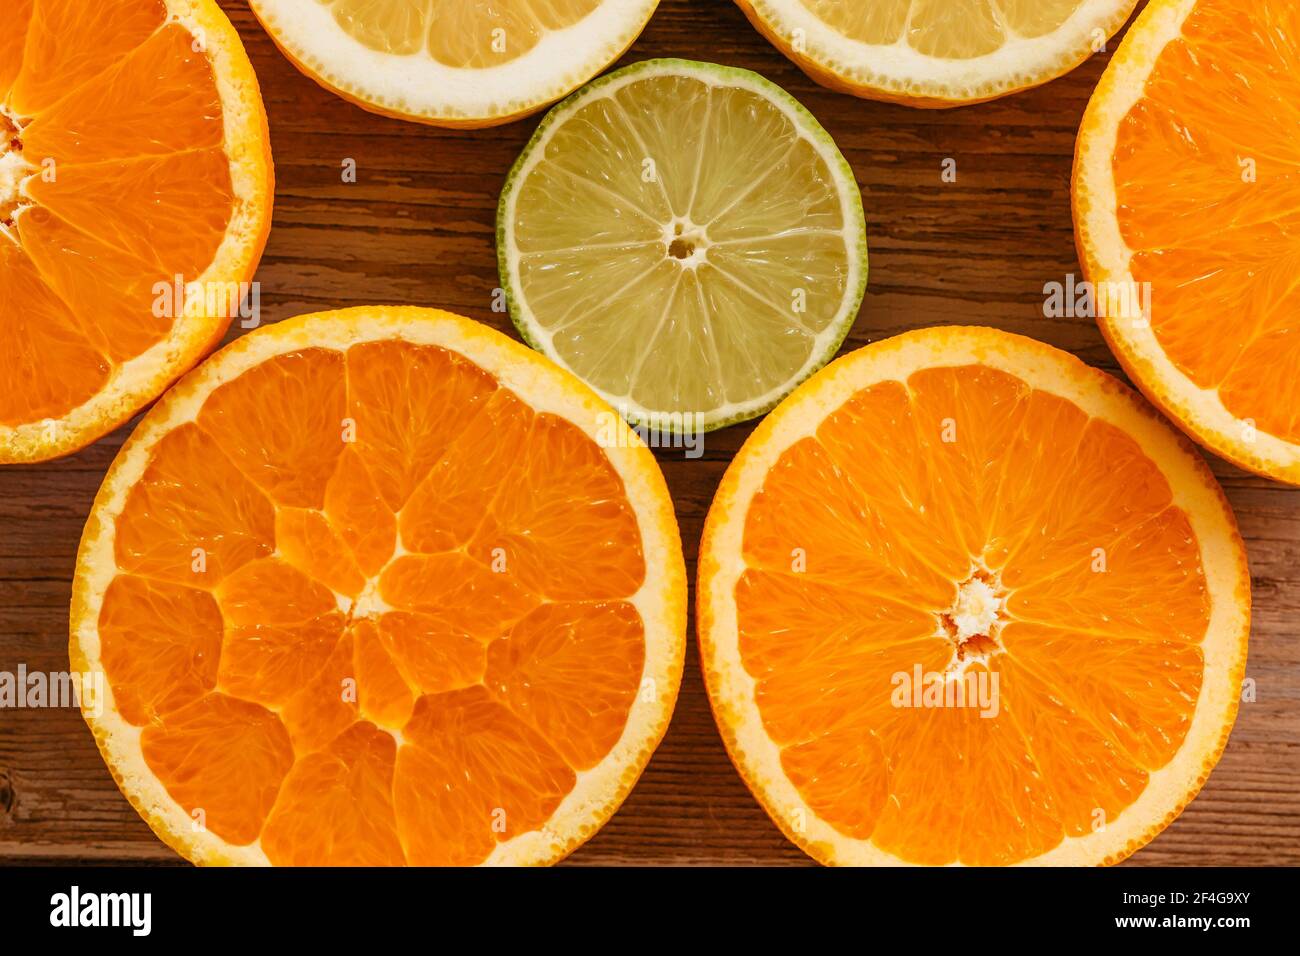 Oranges,limes and lemons slides on wooden table view from above.Beautiful background with fresh fruit half cut.Healthy eating vitamin C.Summer tropica Stock Photo